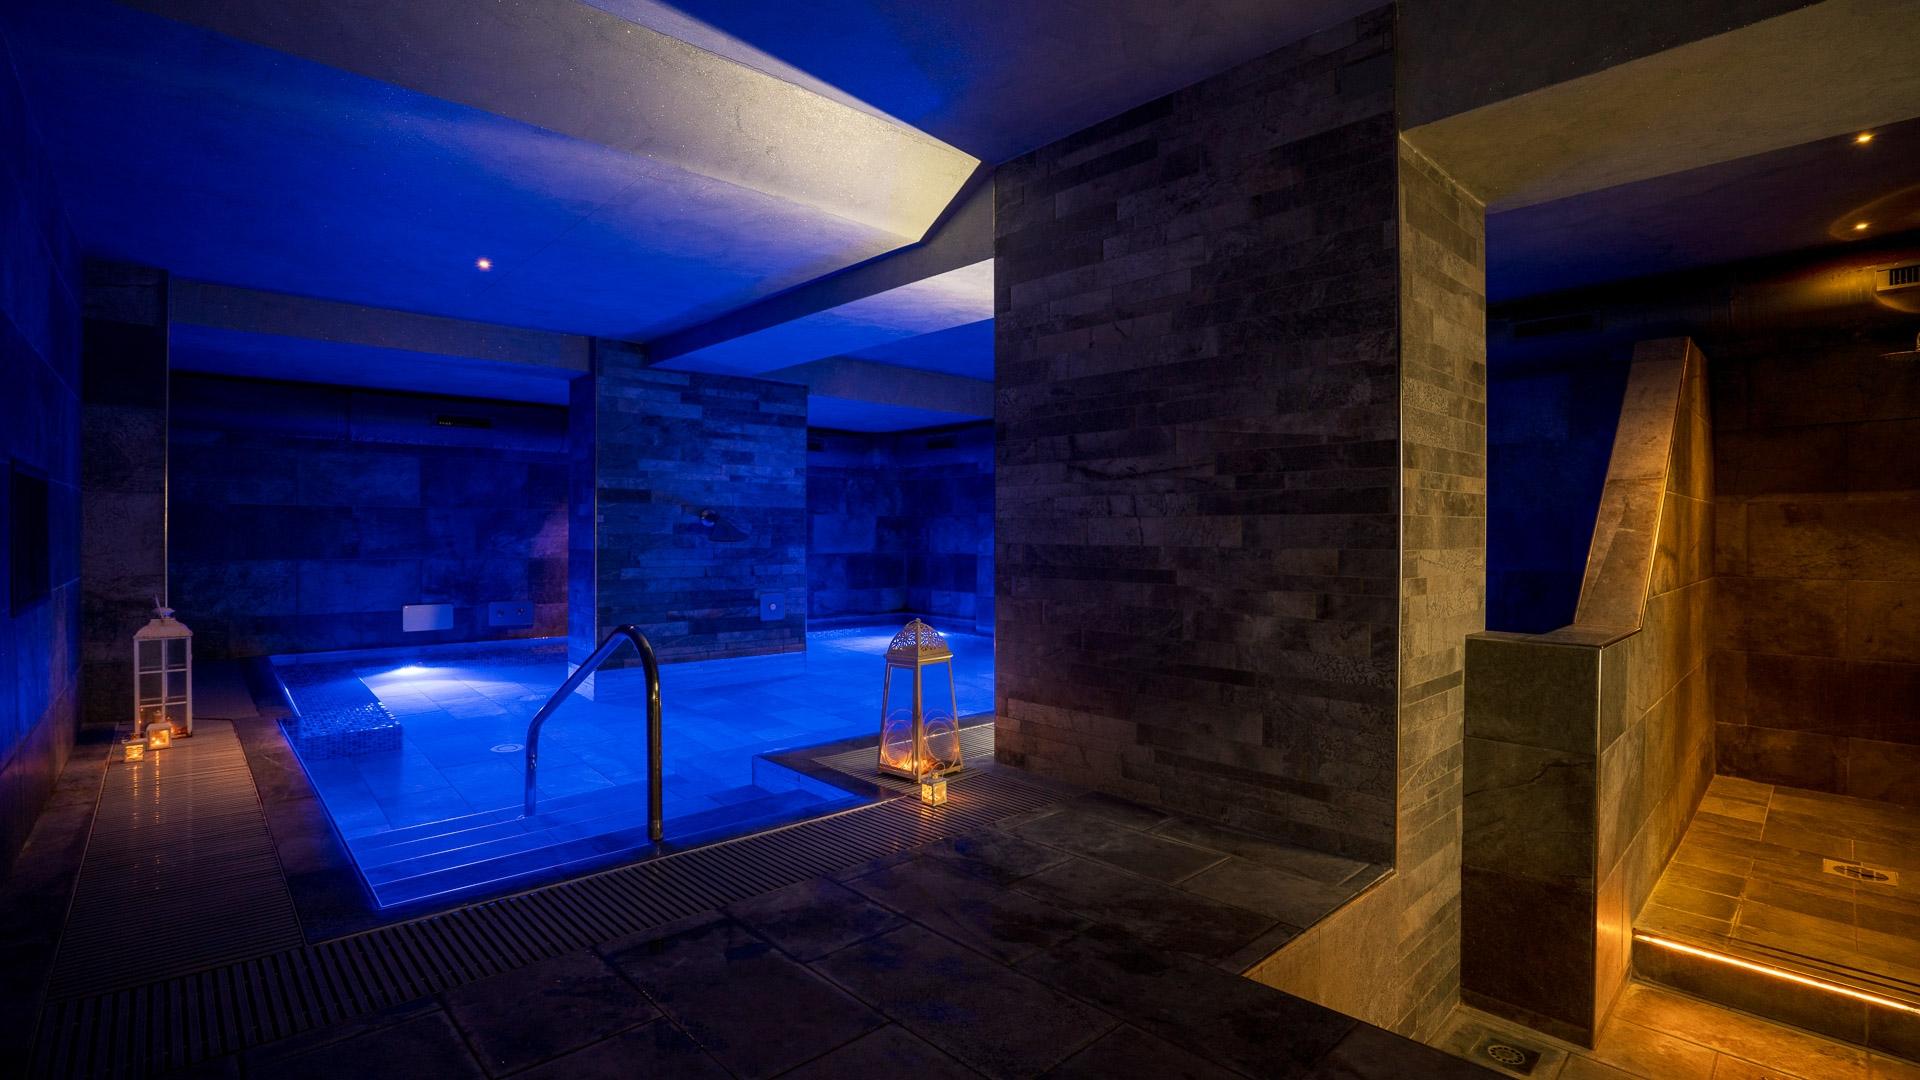 grand-hotel-terme-chianciano fr nouvel-an-hotel-4-etoiles-a-chianciano-offre-avec-massage 011